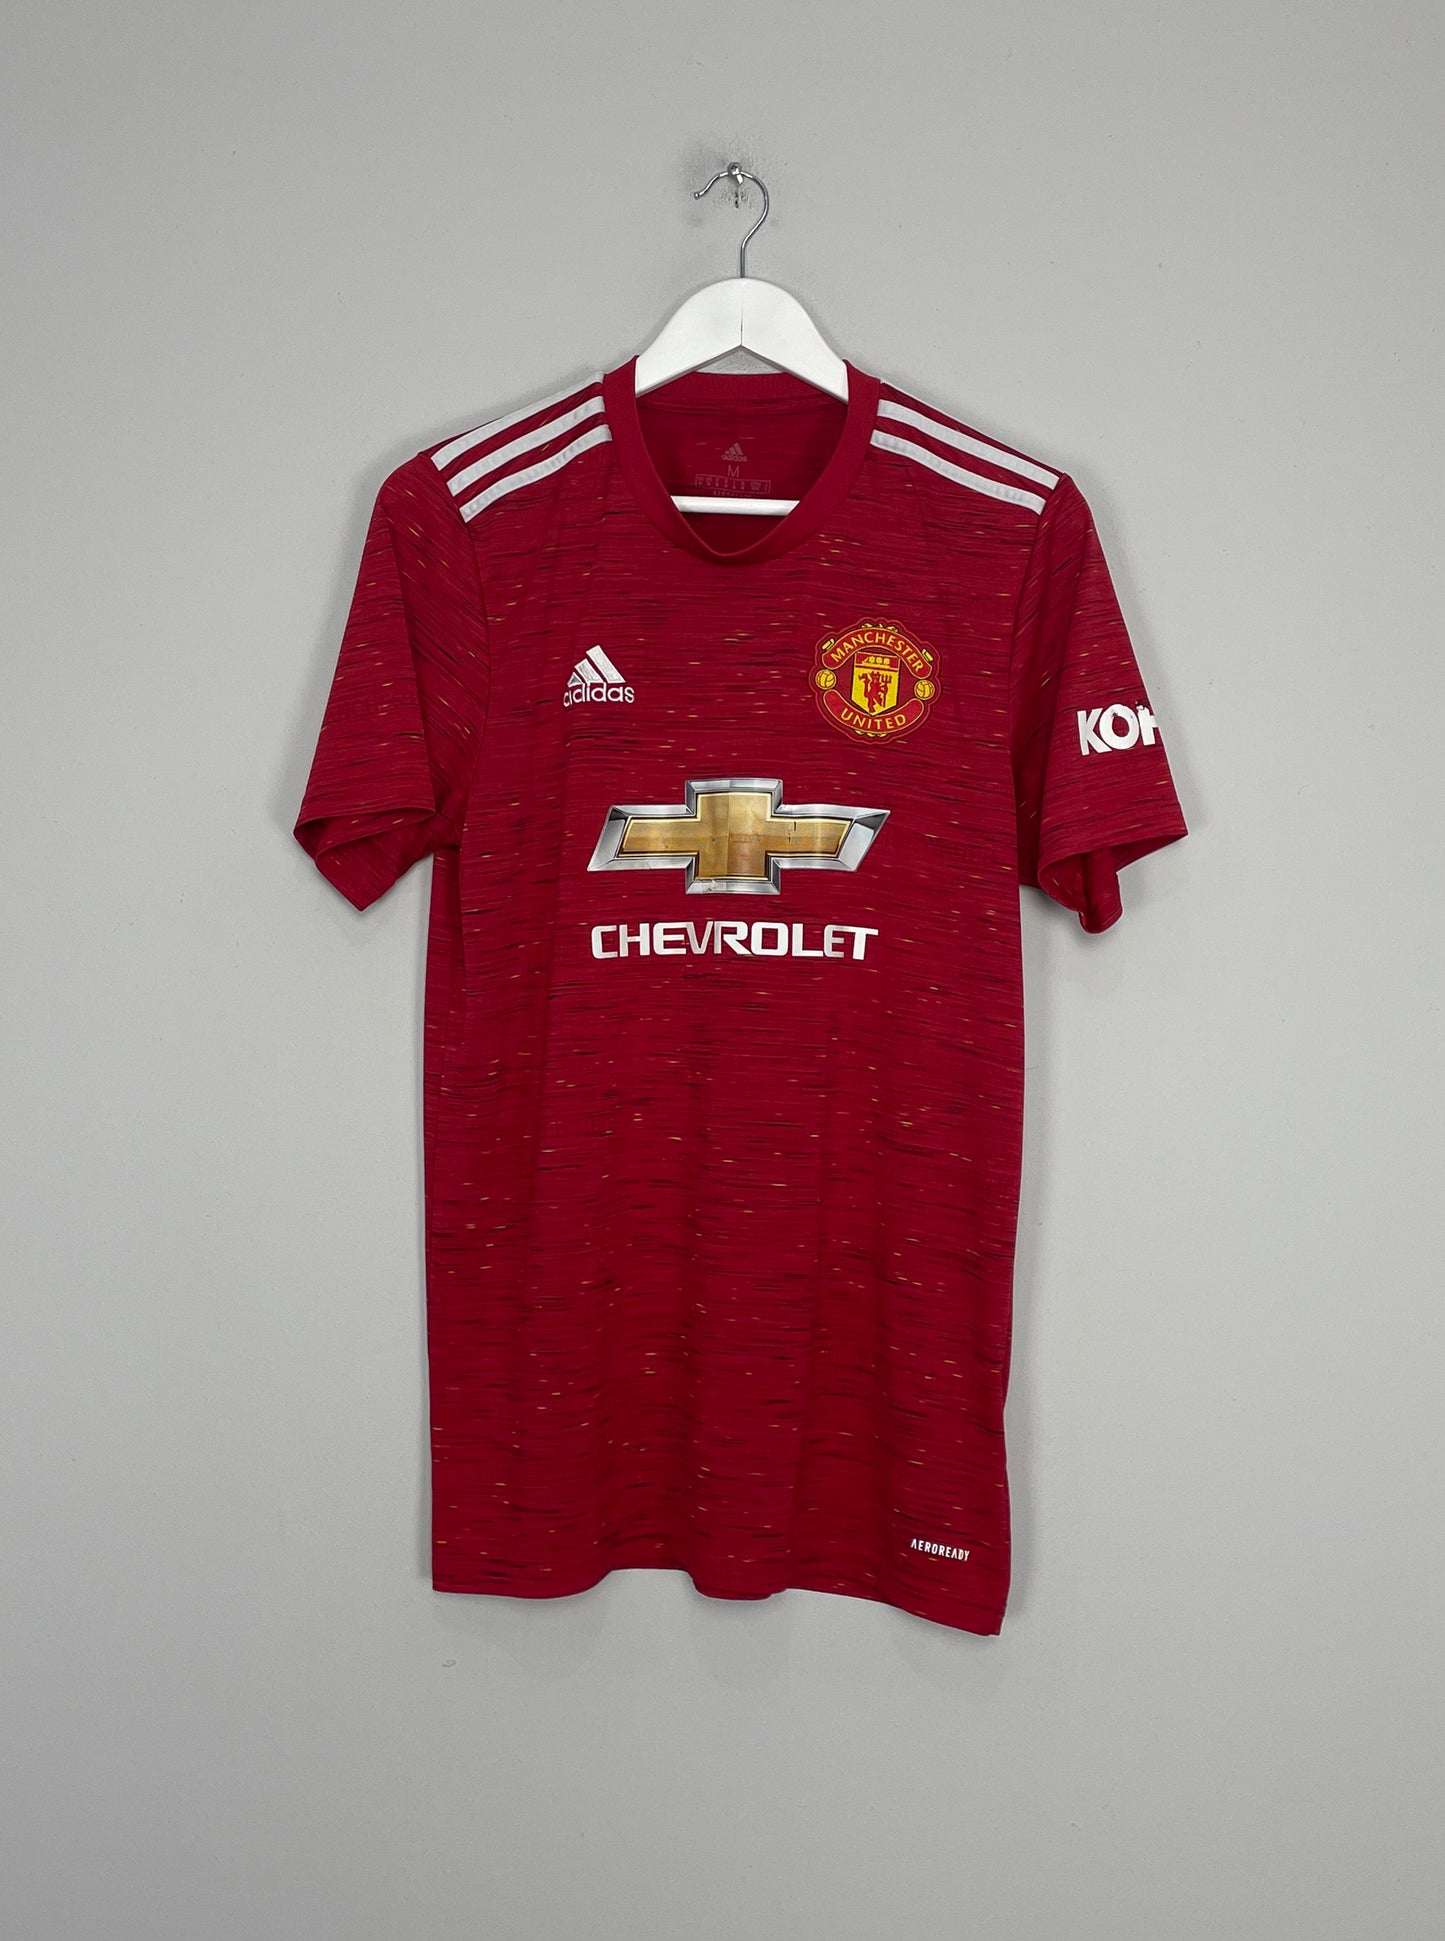 Image of the Manchester United shirt from the 2020/21 season